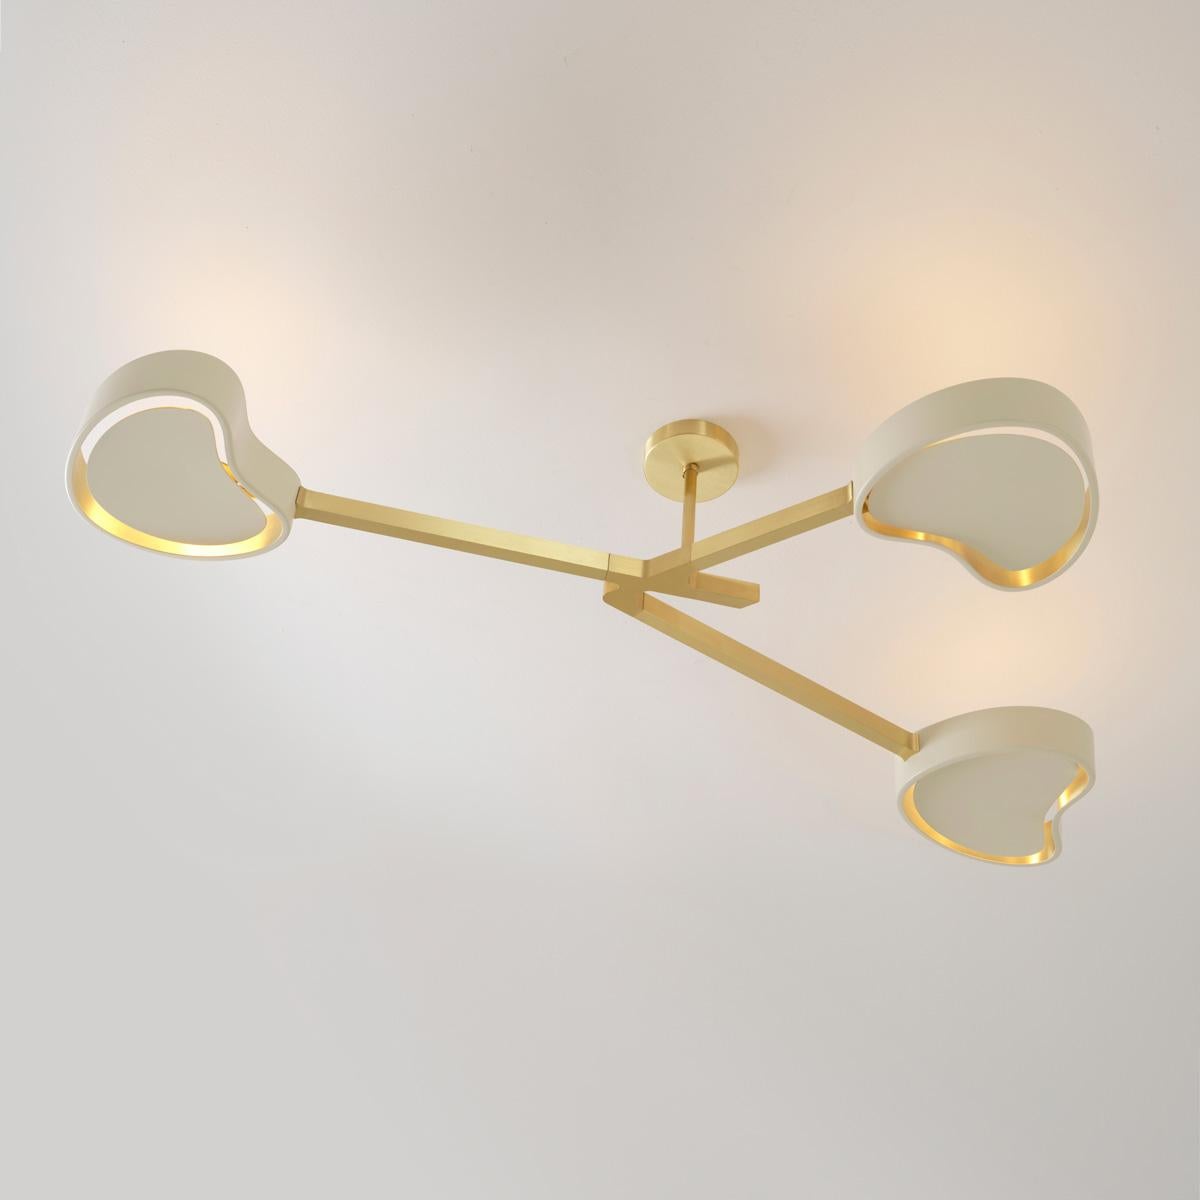 Cuore N.3 Ceiling Light by Gaspare Asaro. Bronze Finish In New Condition For Sale In New York, NY